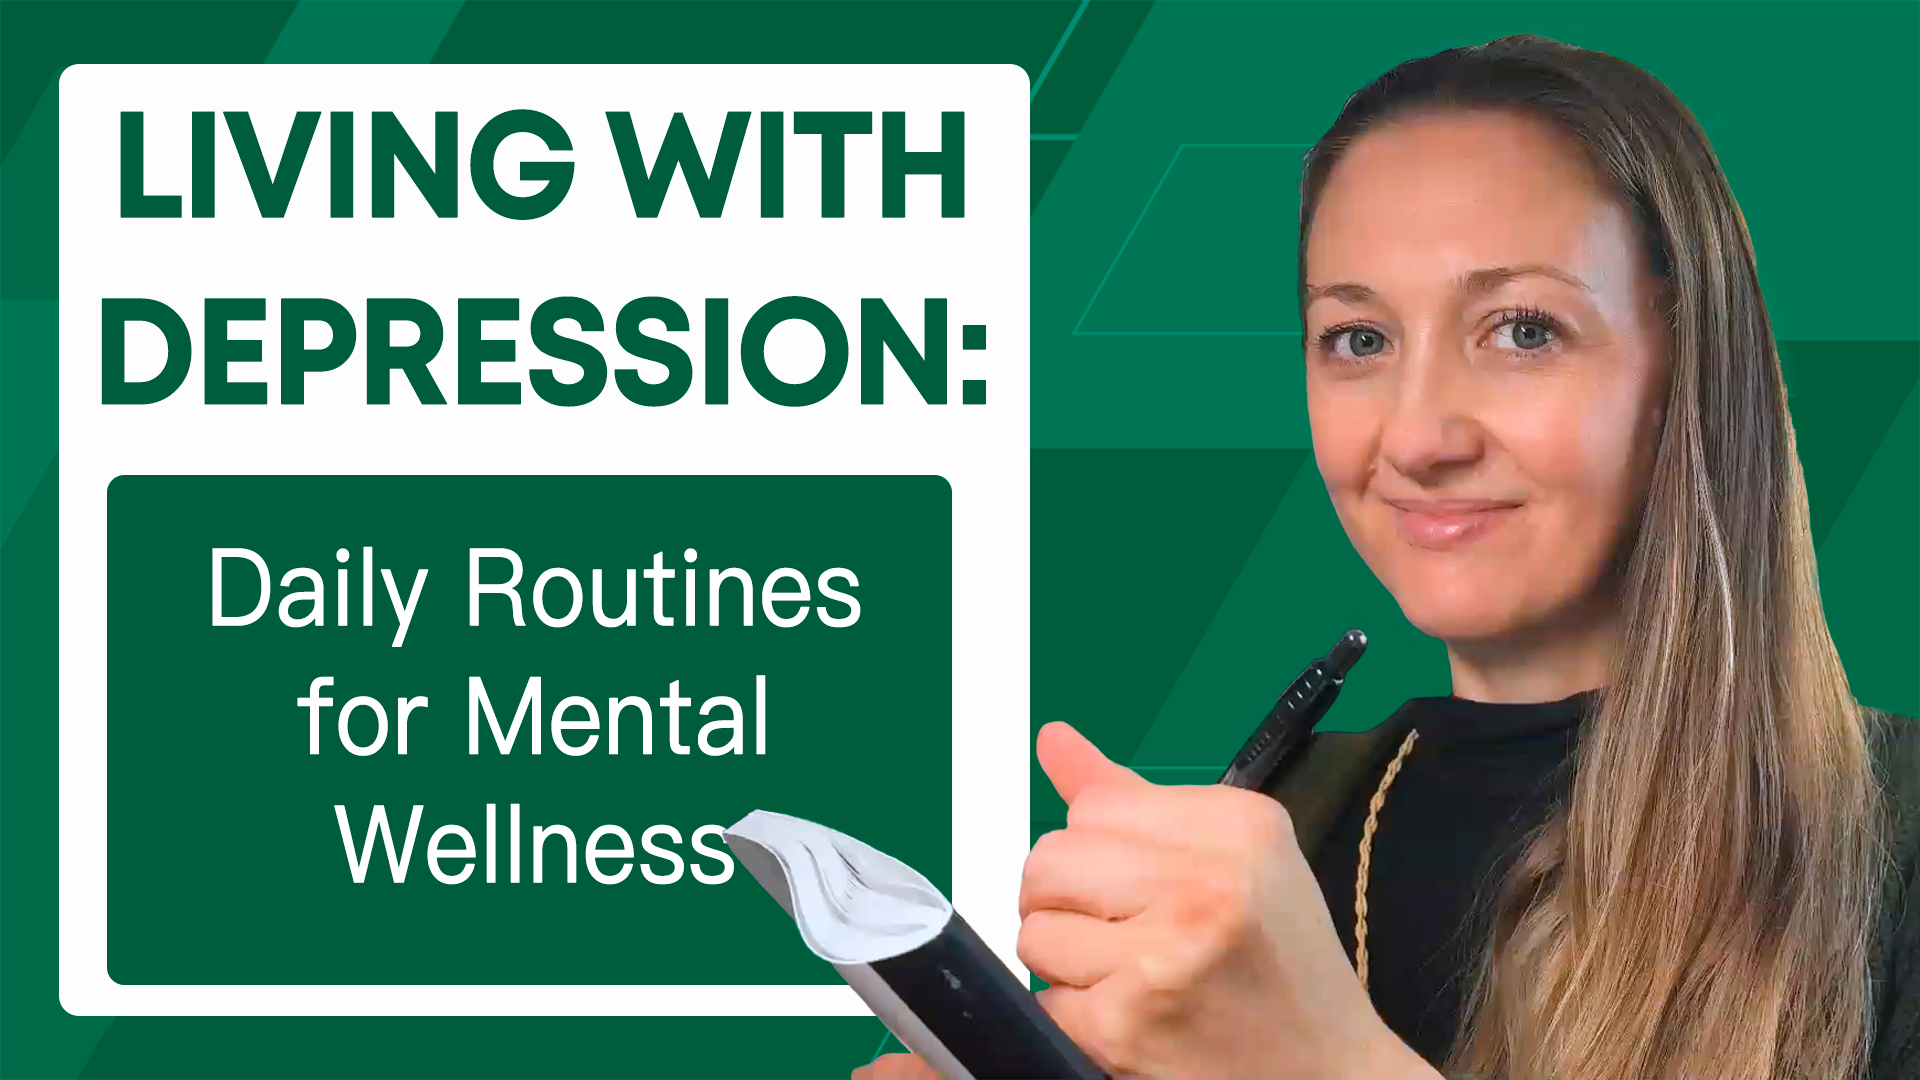 Living with Depression: Daily Routines for Mental Wellness